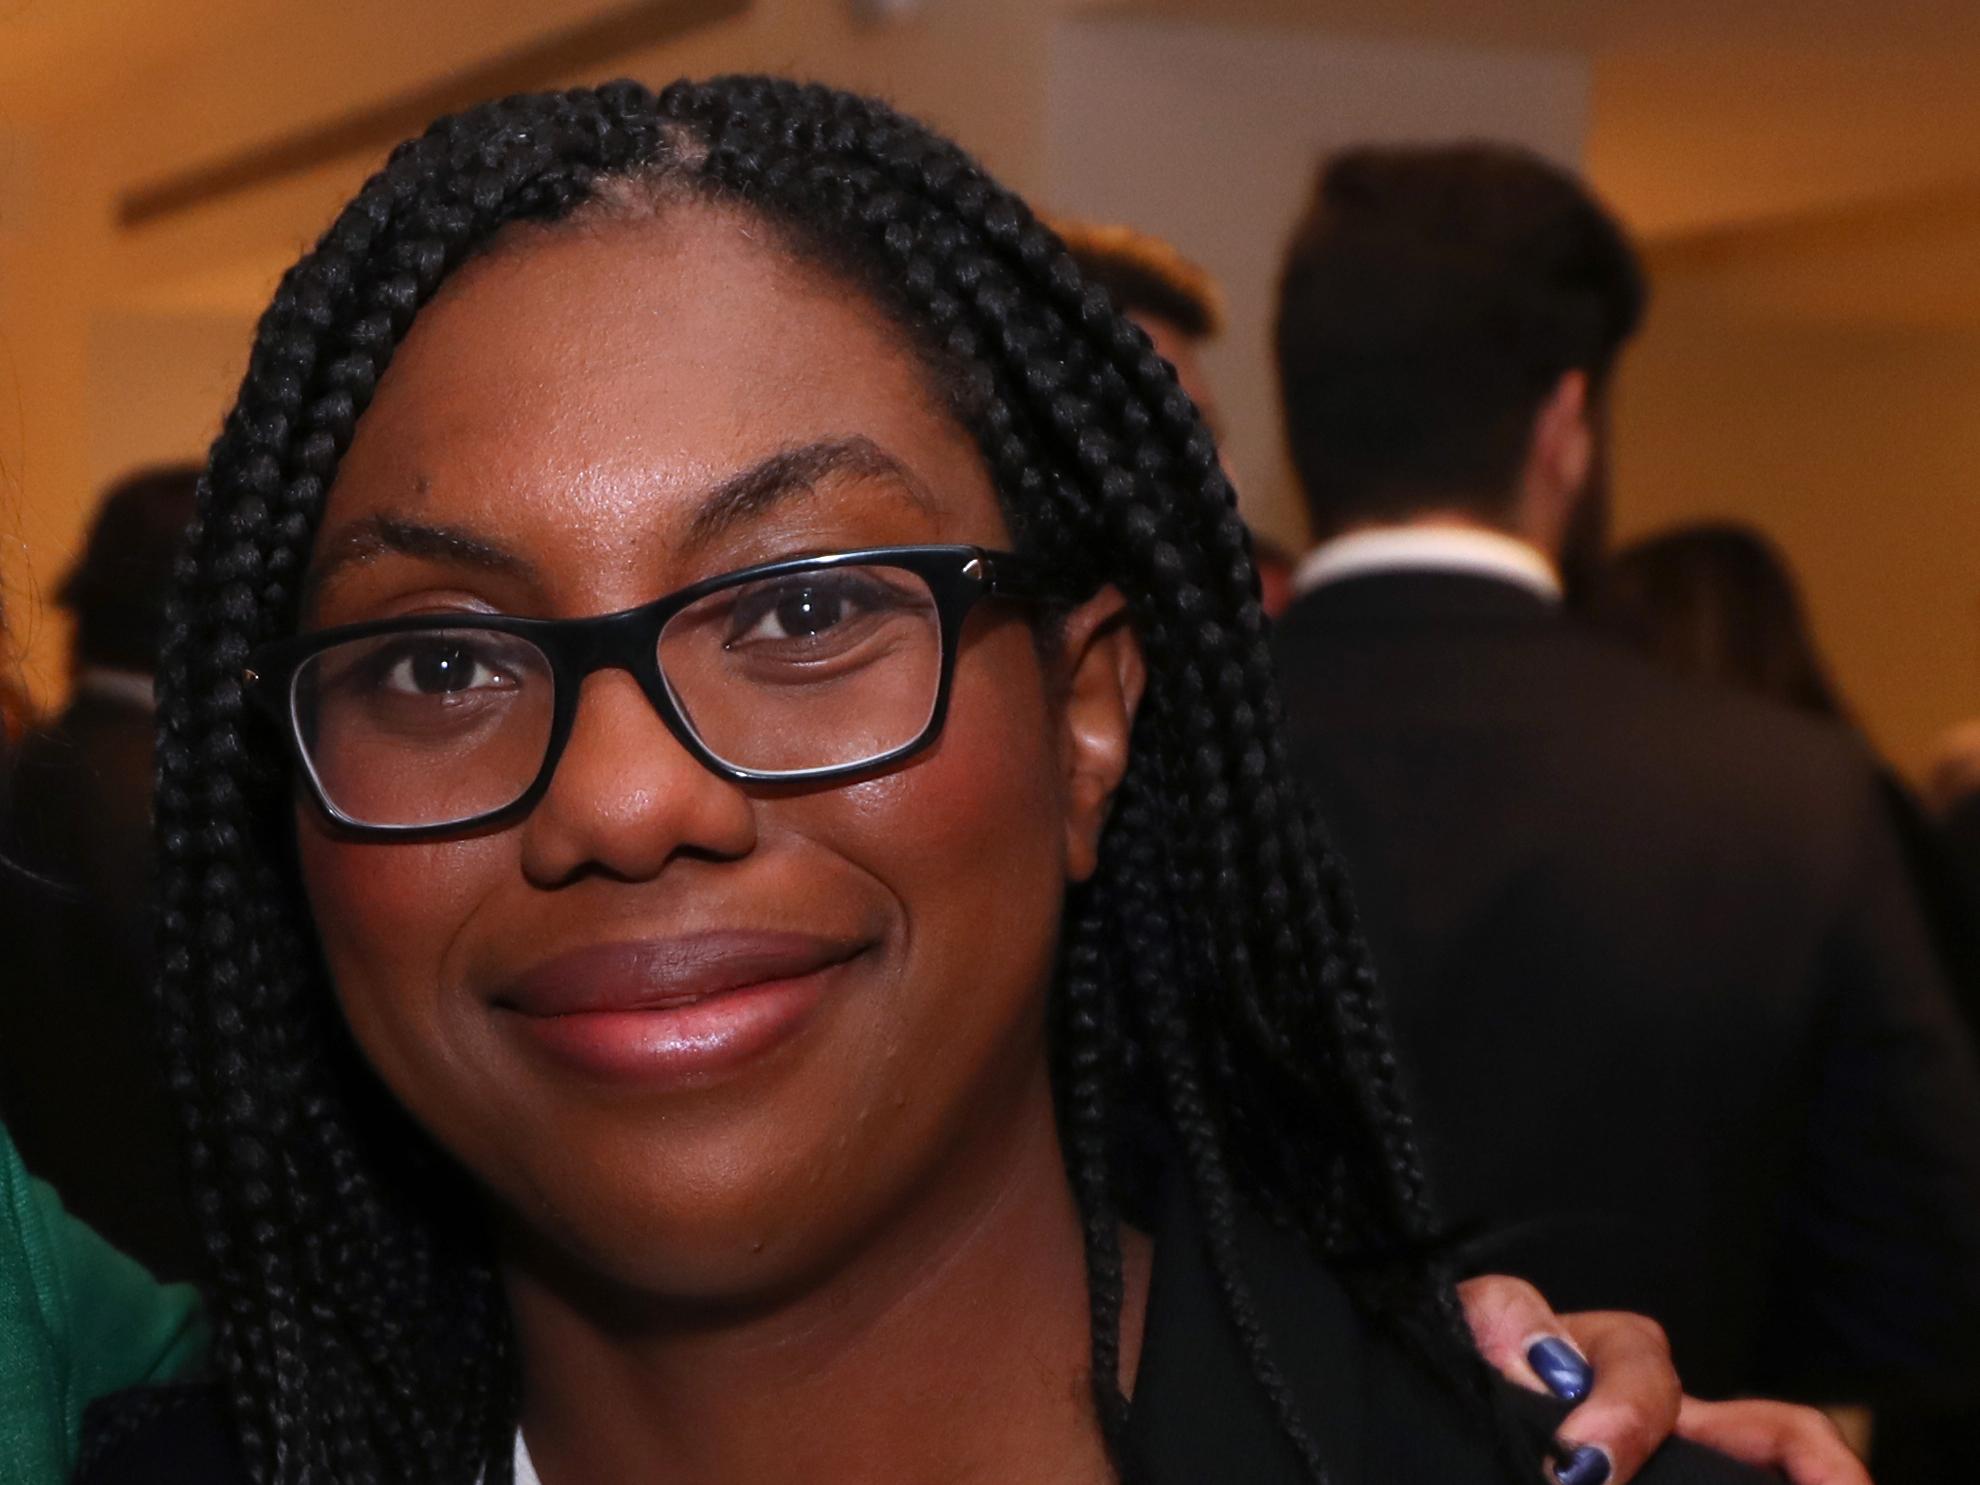 Kemi Badenoch has not revealed who she targeted